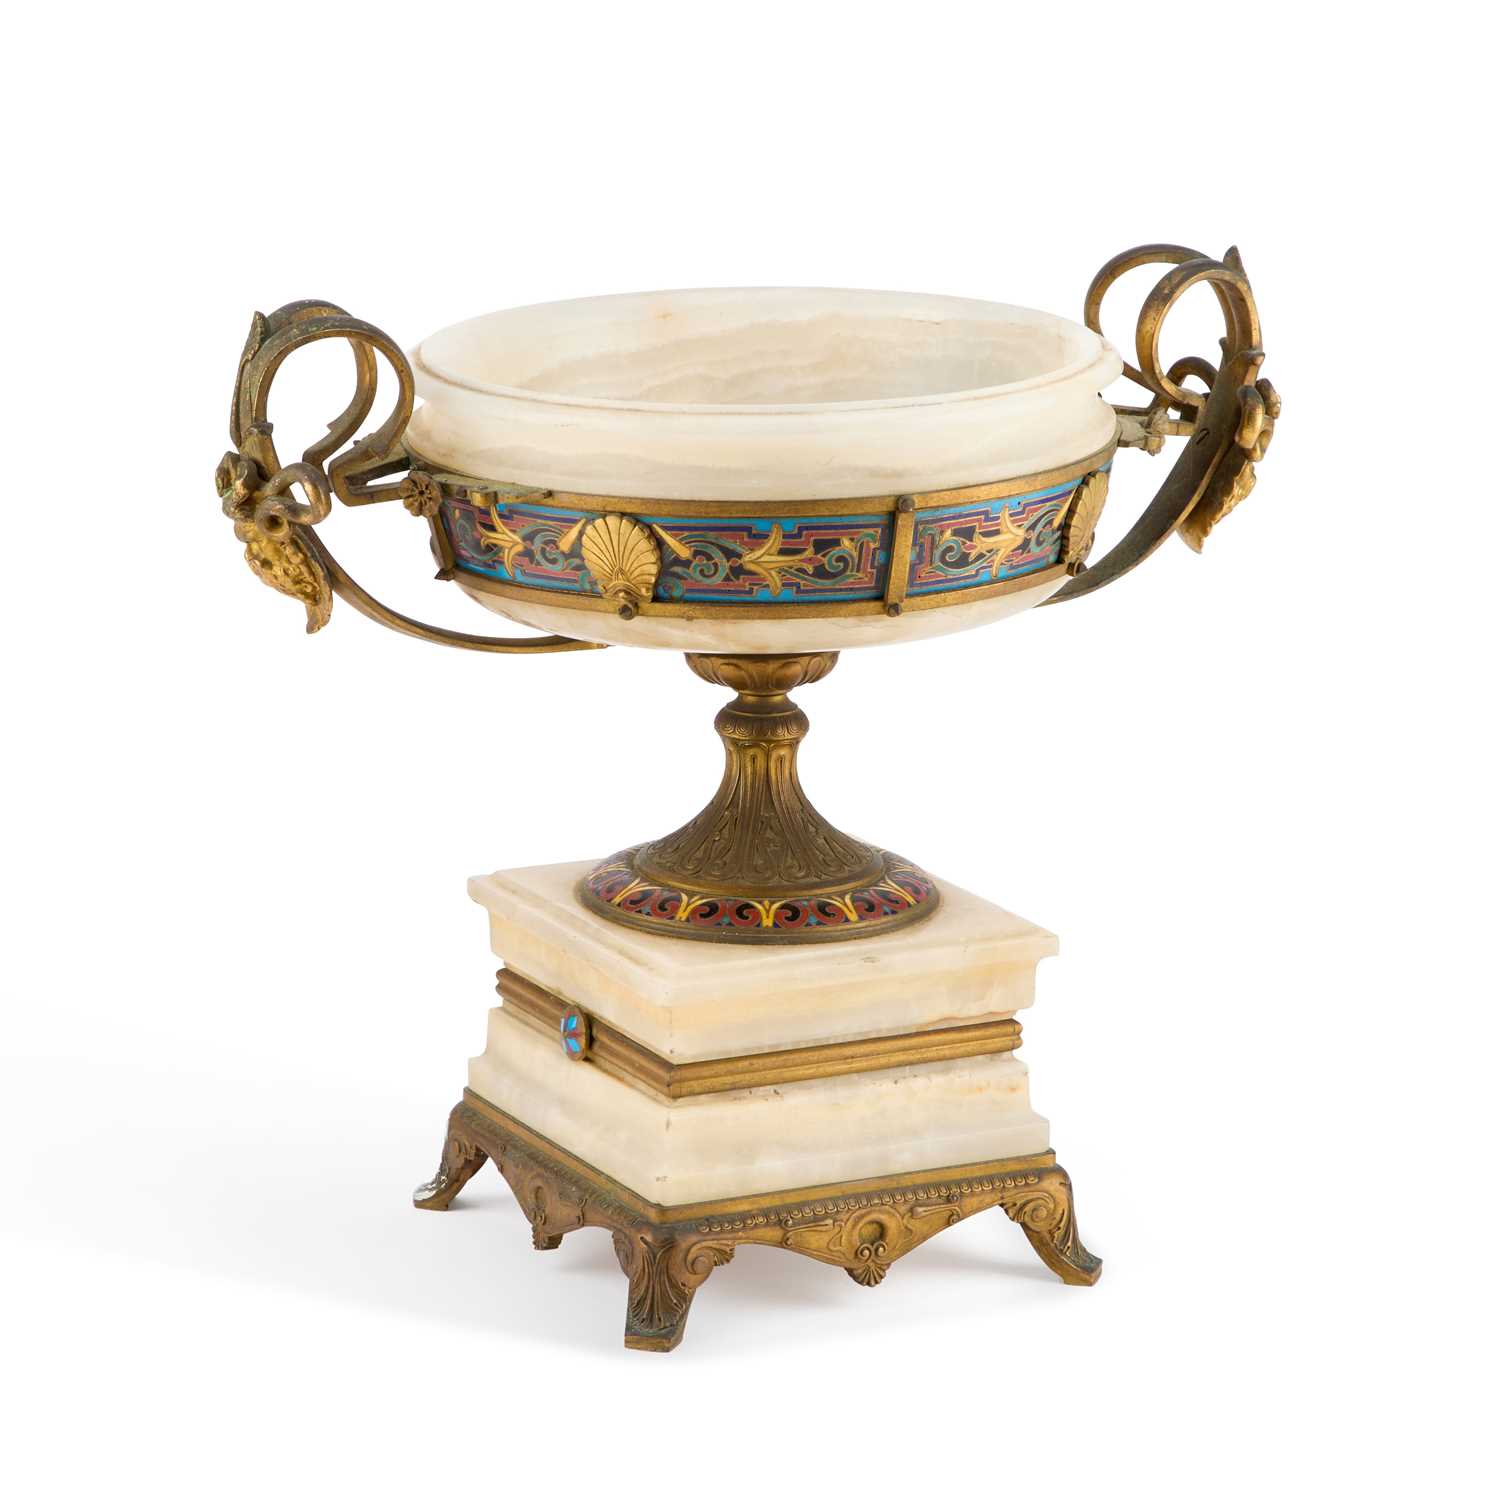 Lot 146 - A FRENCH BRONZE, CLOISONNÉ ENAMEL AND ONYX TAZZA BY FERDINAND BARBEDIENNE, LATE 19TH CENTURY